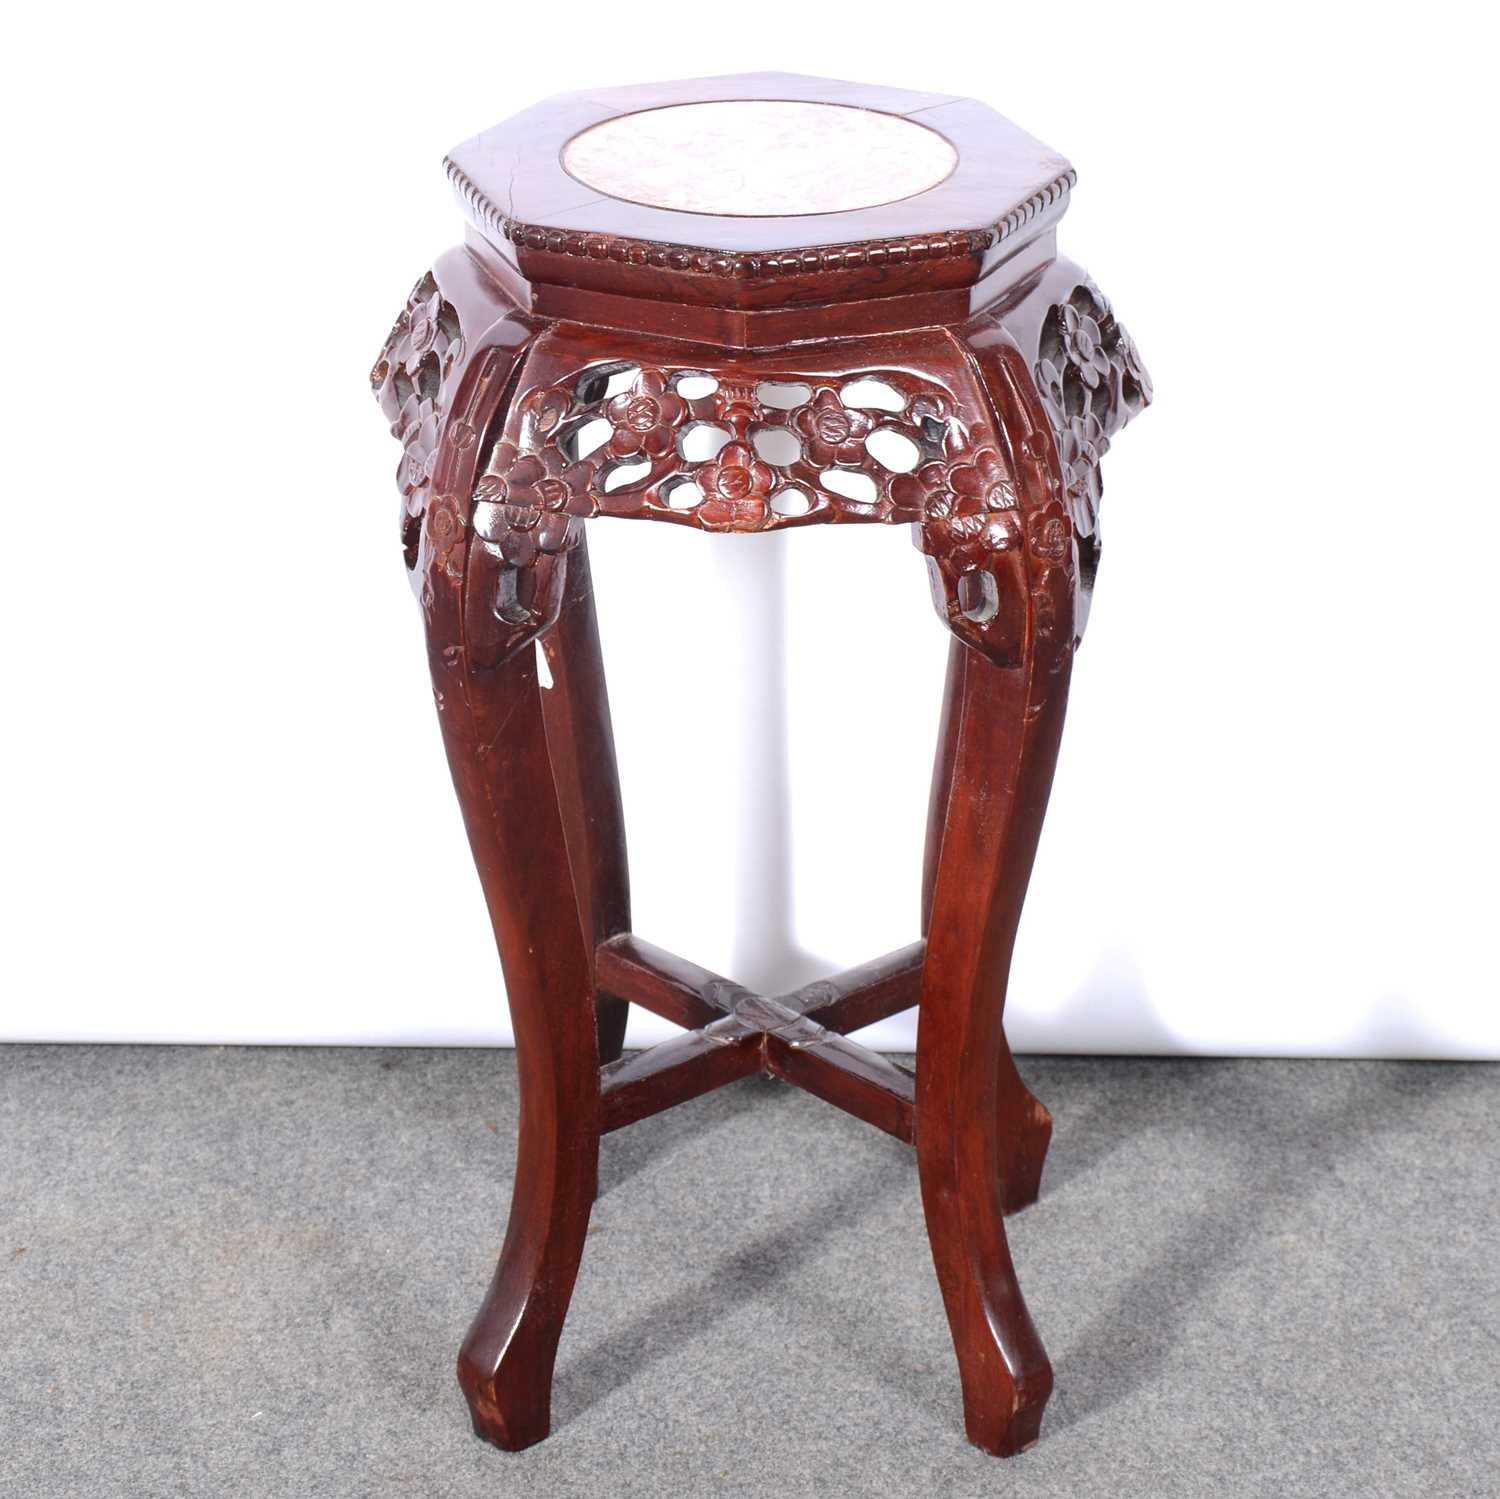 Chinese carved wood jardiniere stand with marble inset octagonal top,